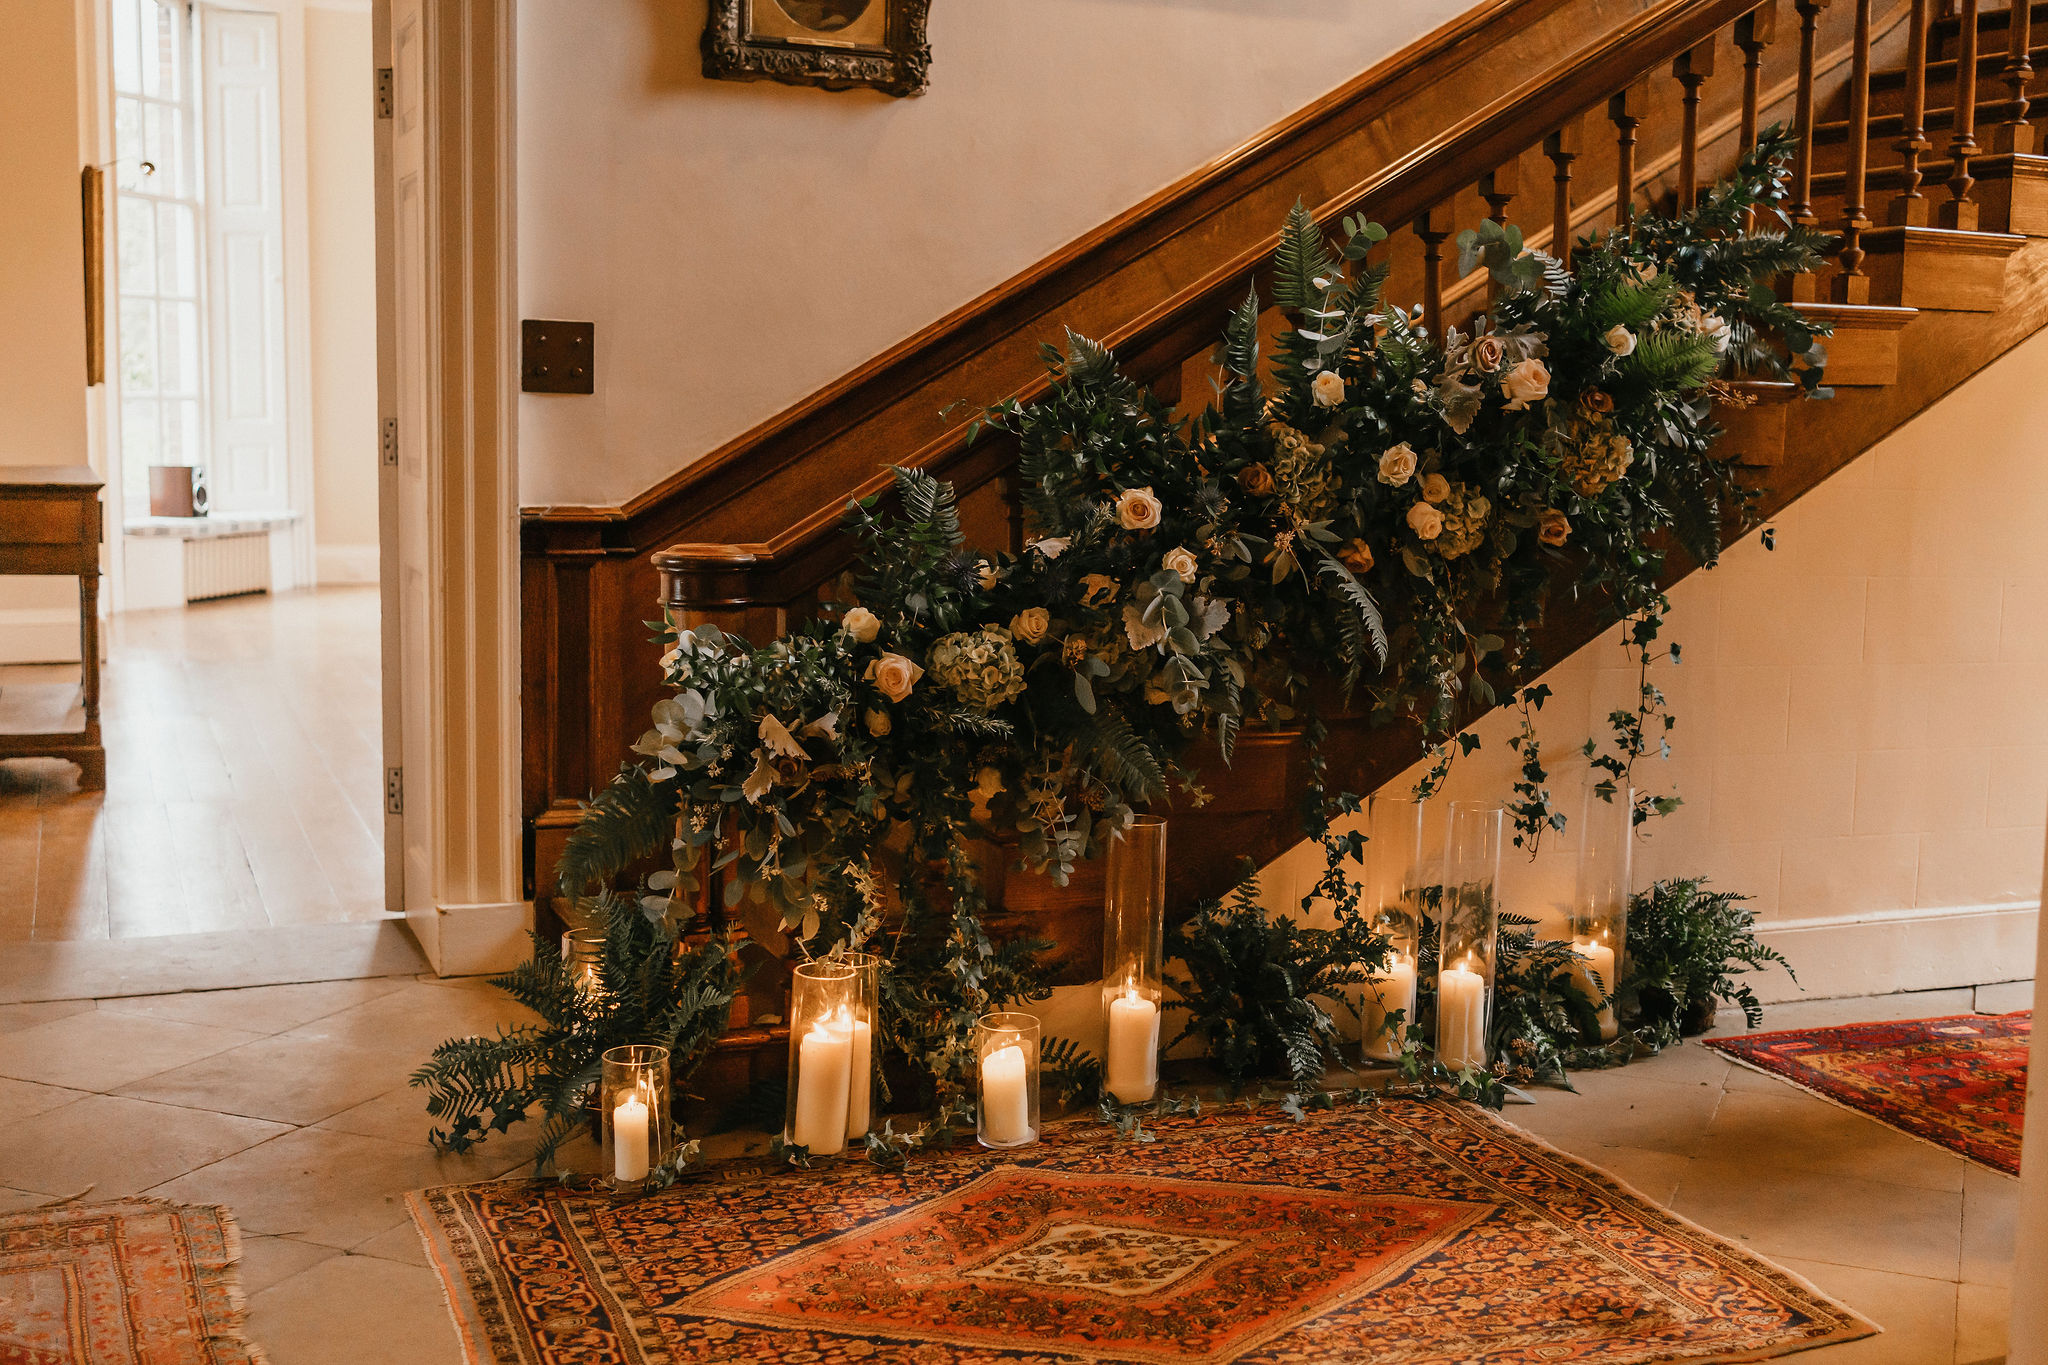 Roses, hydrangeas and peach blossoms mixed with ivy and eucalyptus are entwined around the bannister of a wooden Georgian bannister